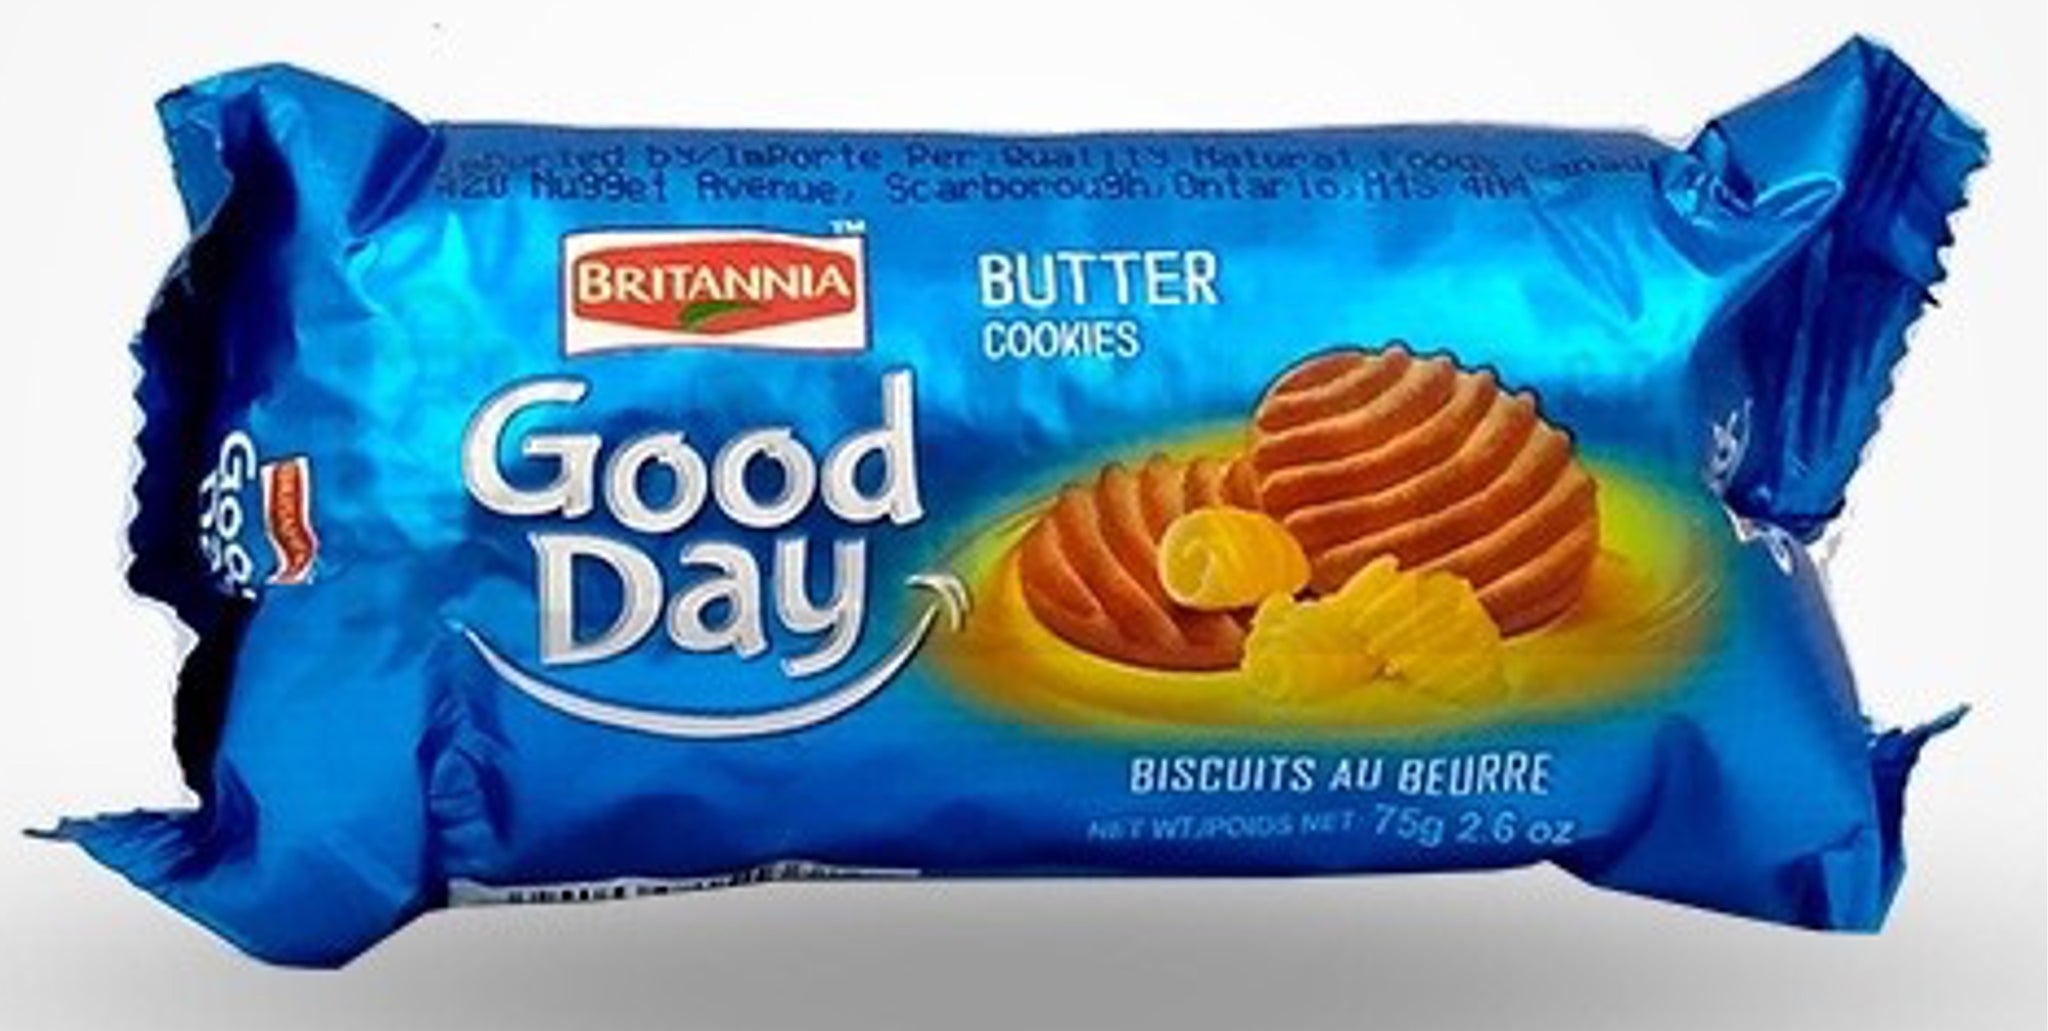 Good Day (Butter Cookies)